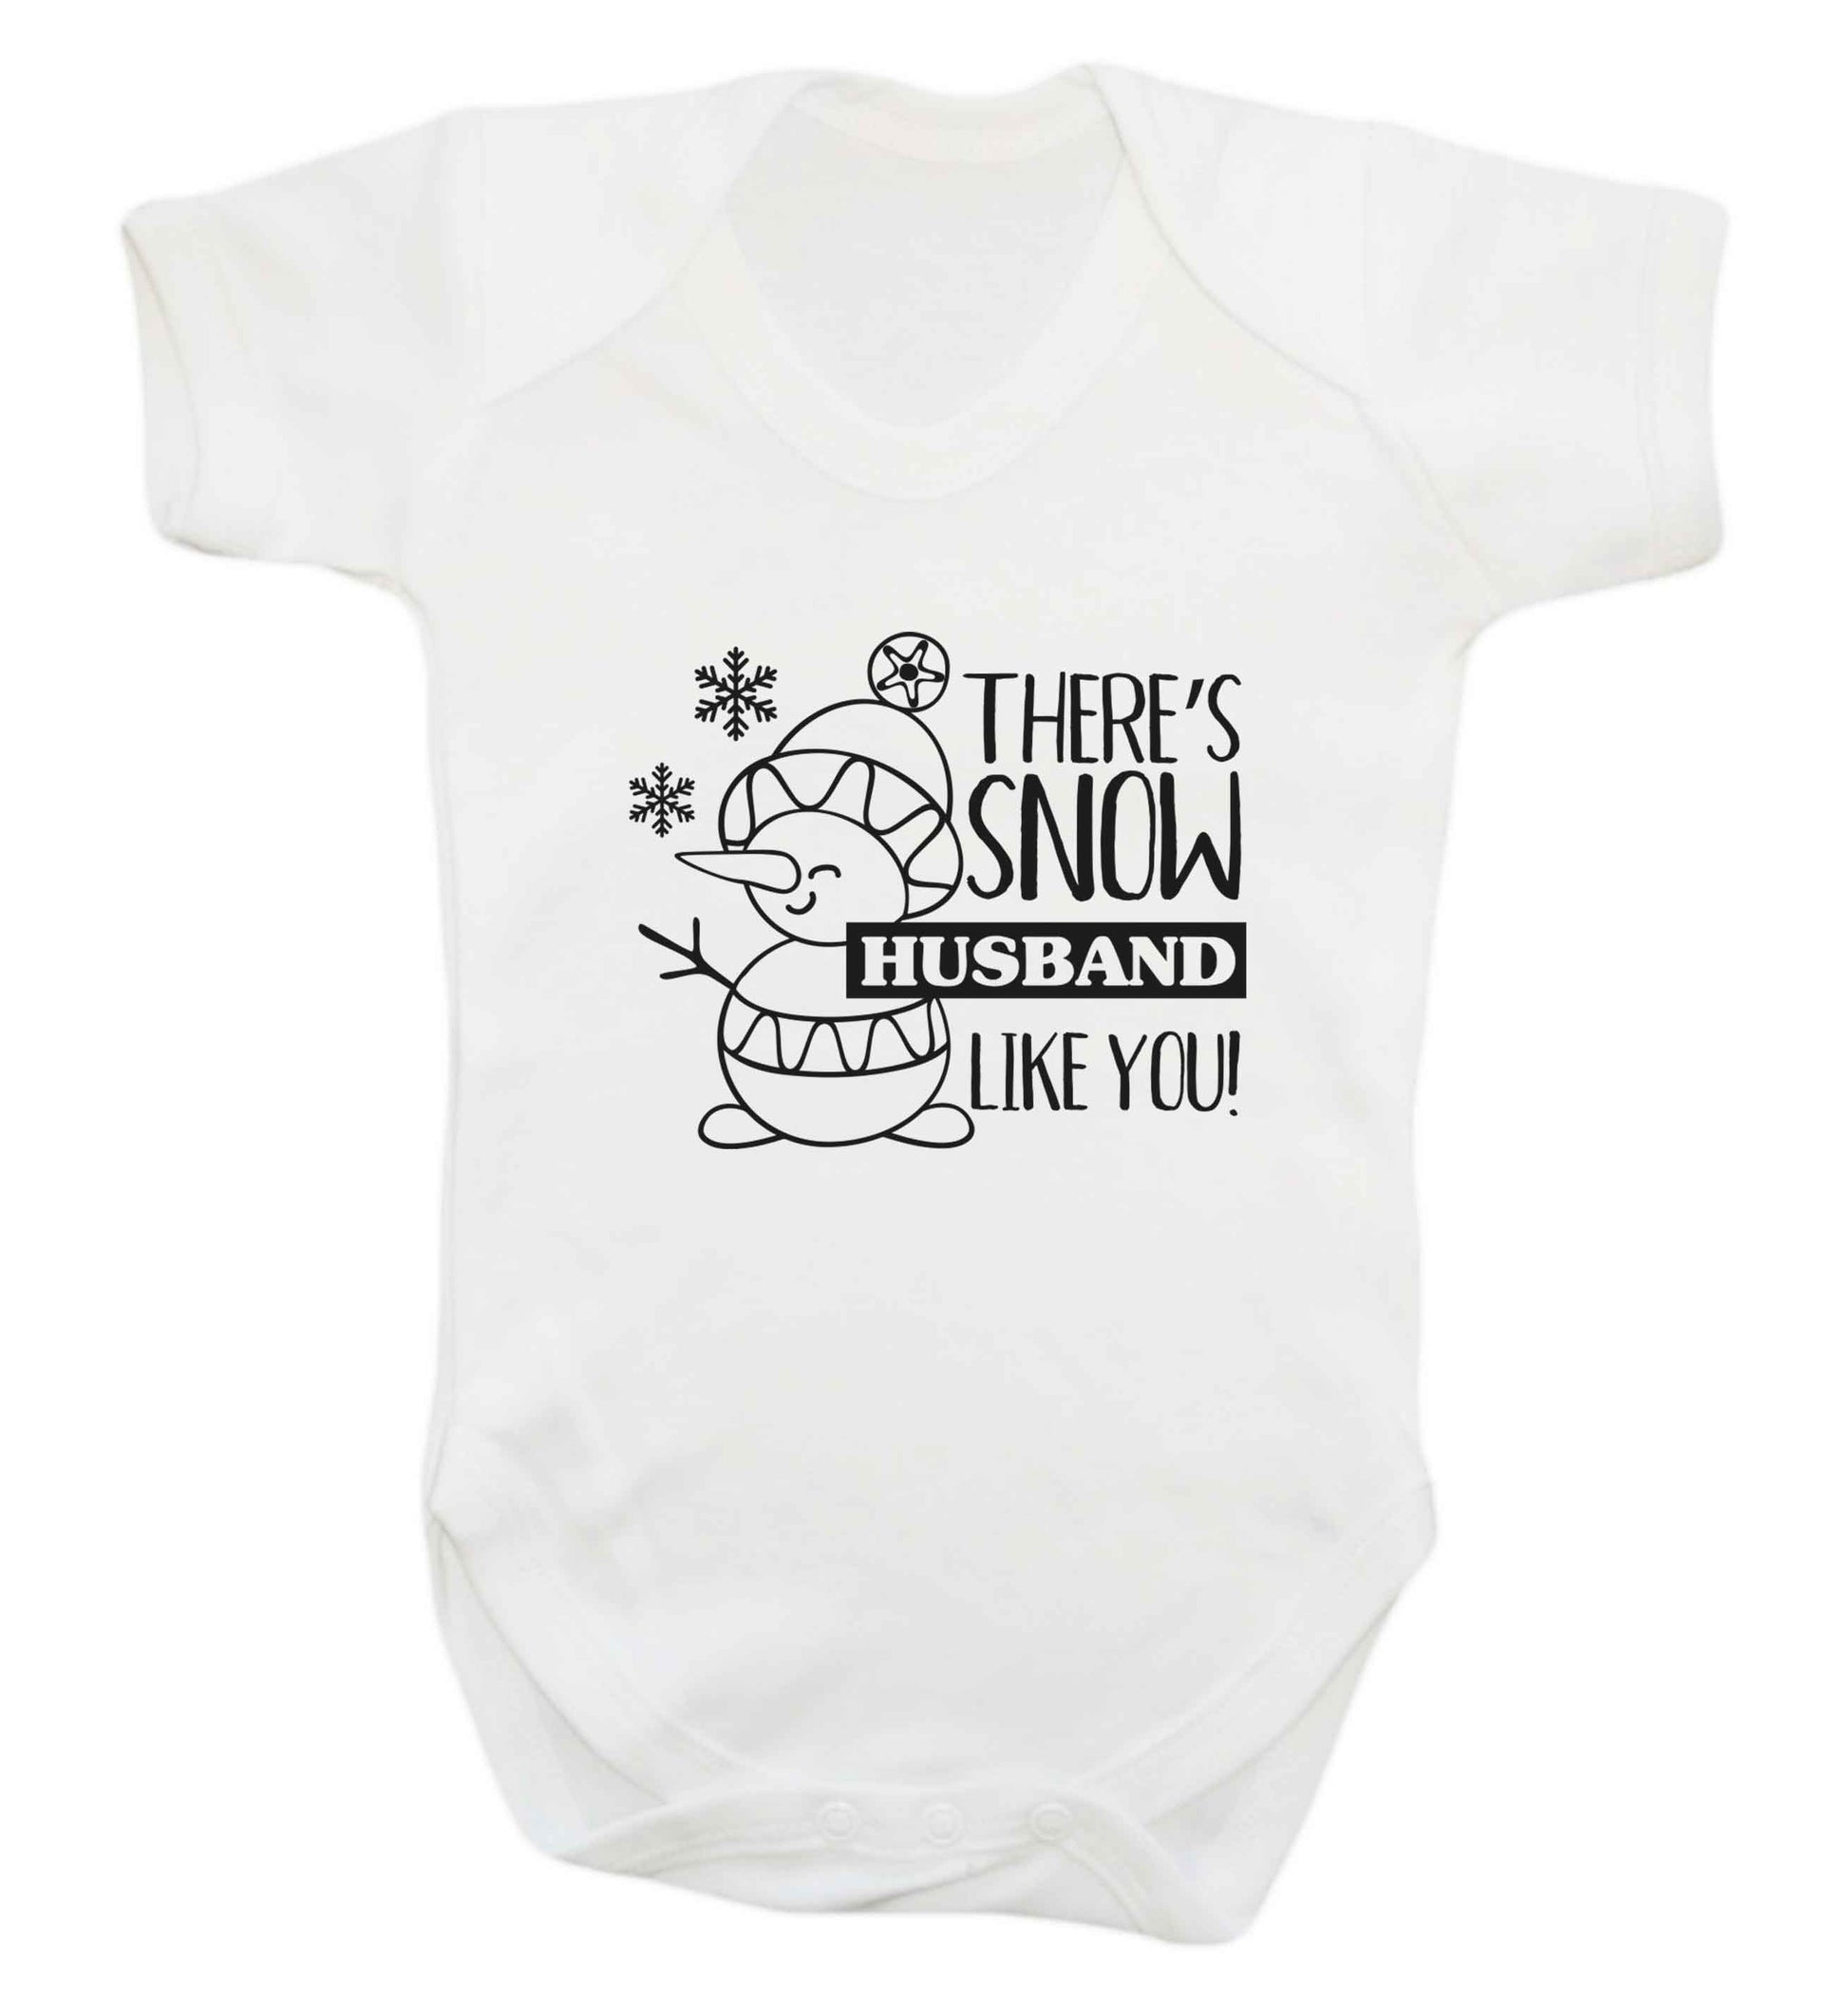 There's snow husband like you baby vest white 18-24 months